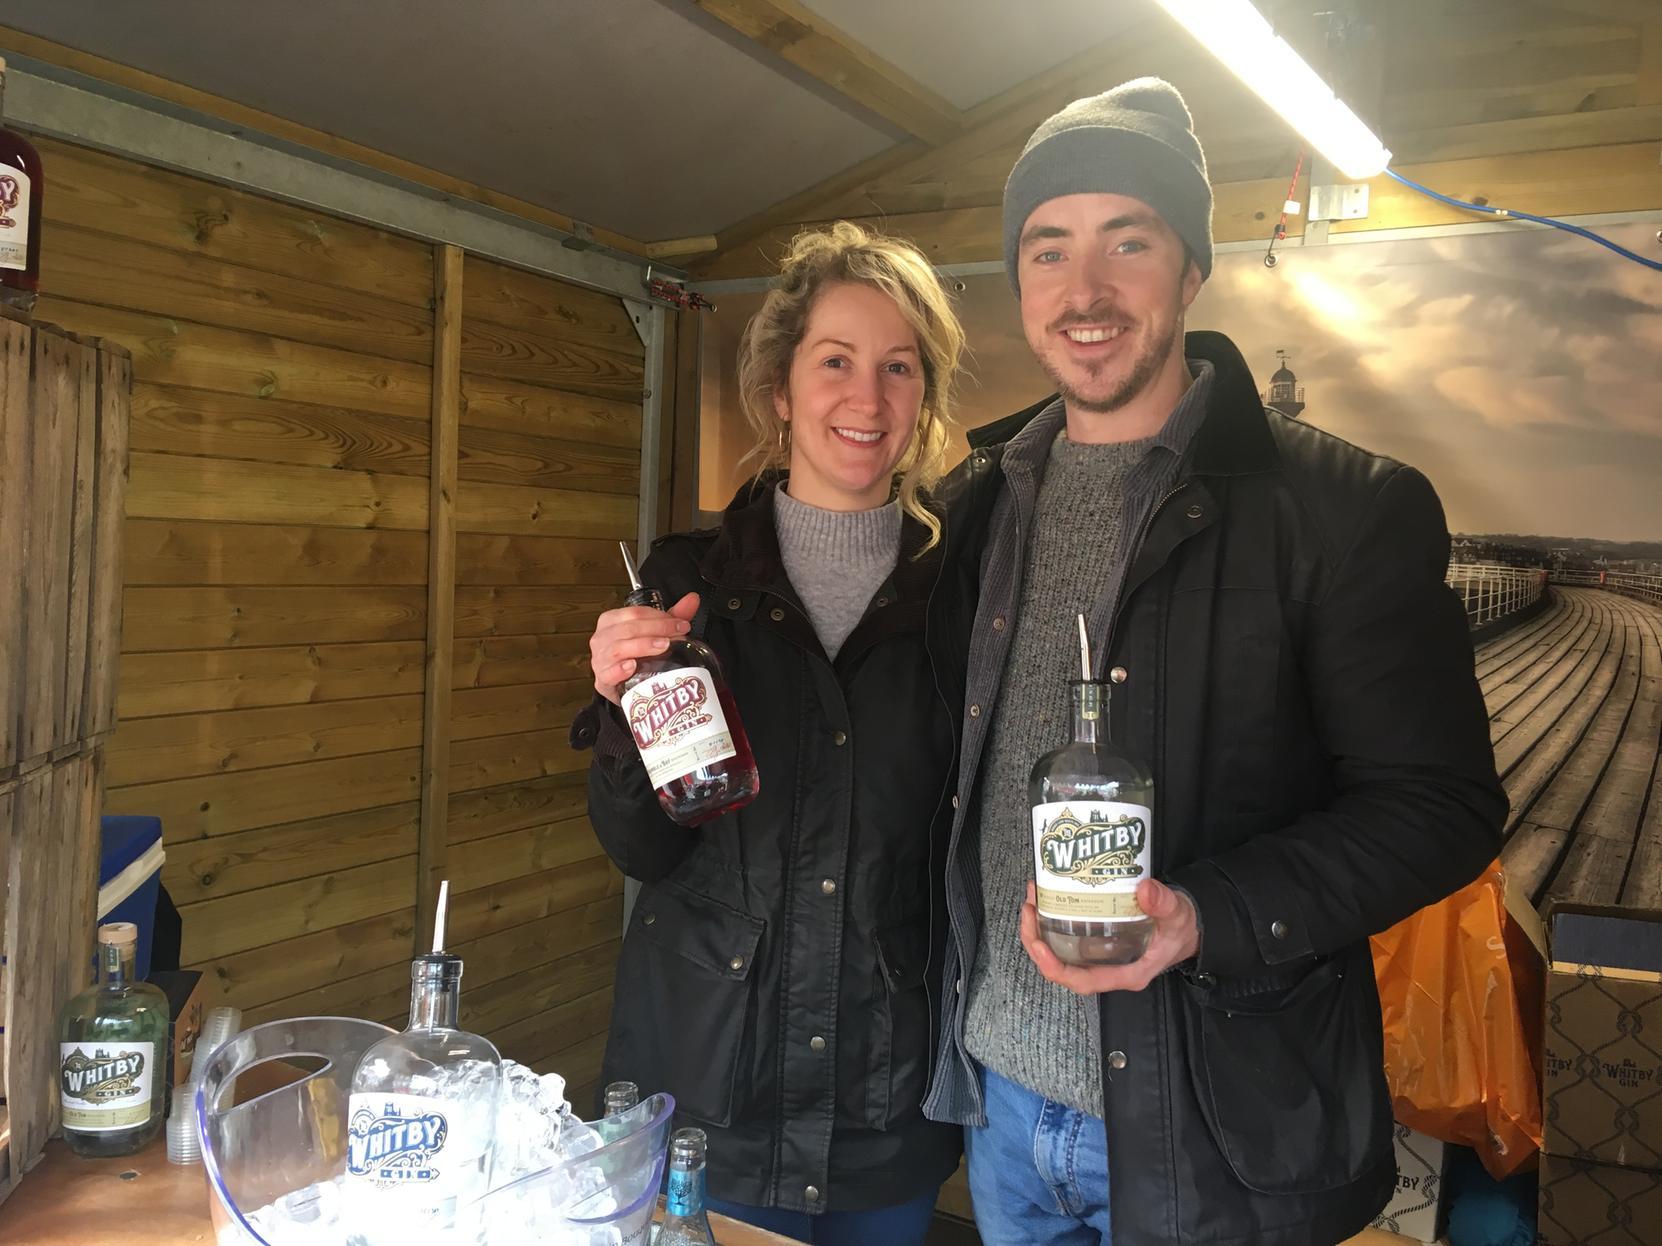 Whitby Distillery Ltd show off their product along with their lovely smiles